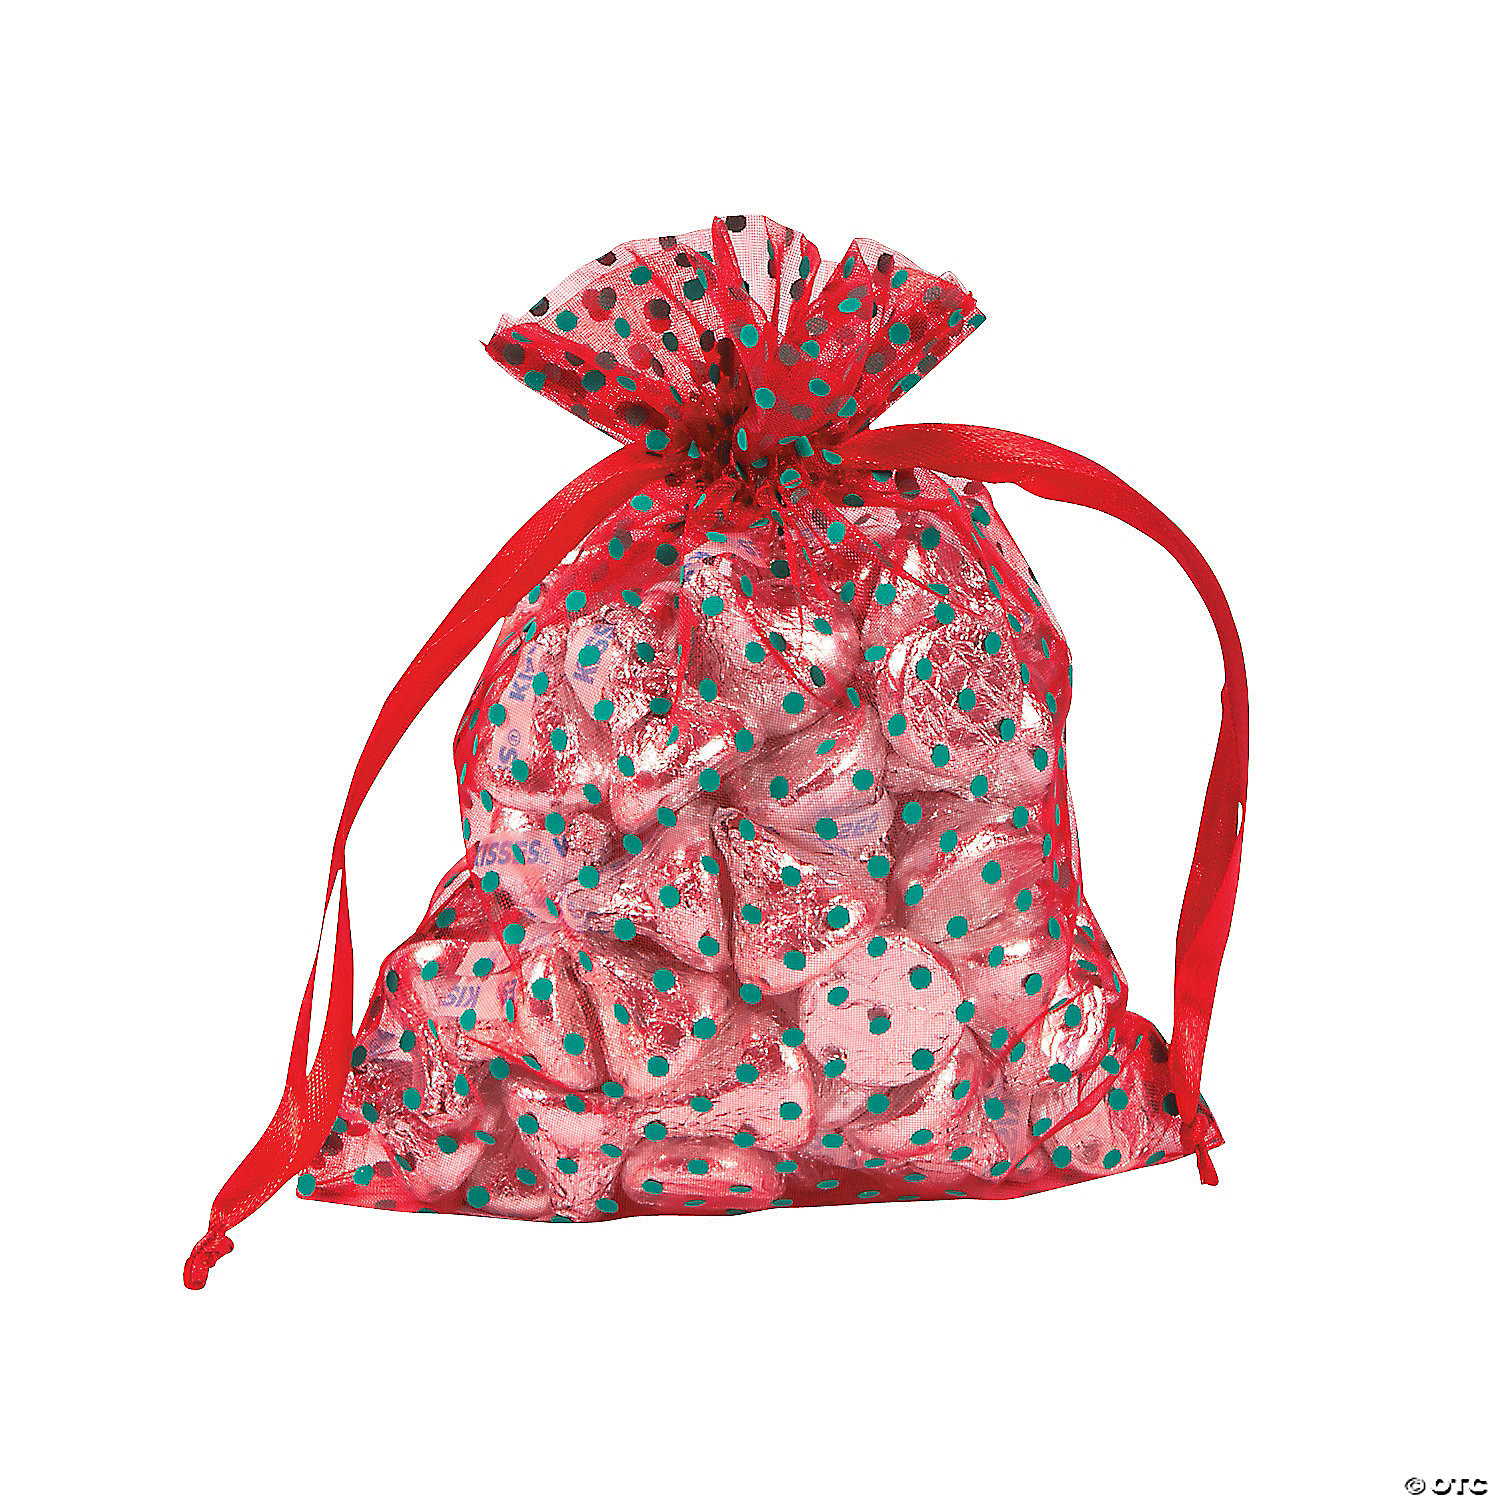 RED Sheer Organza 4" Drawstring Gift Pouch Bags 12pc